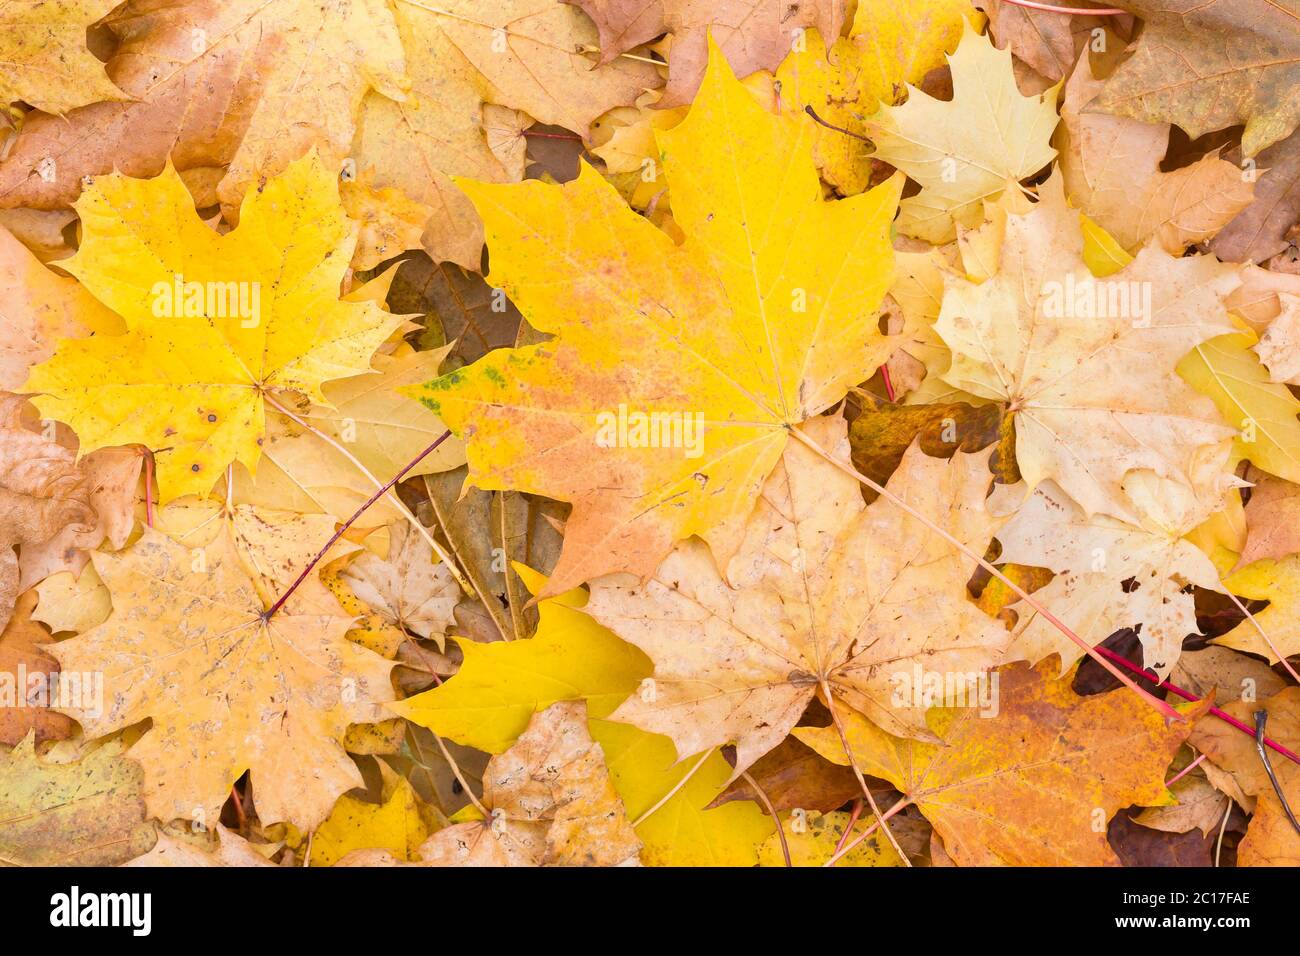 Autumn leaves background. Closeup of sycamore maple (Acer Pseudoplatanus) leaves with fall seasonal colors Stock Photo